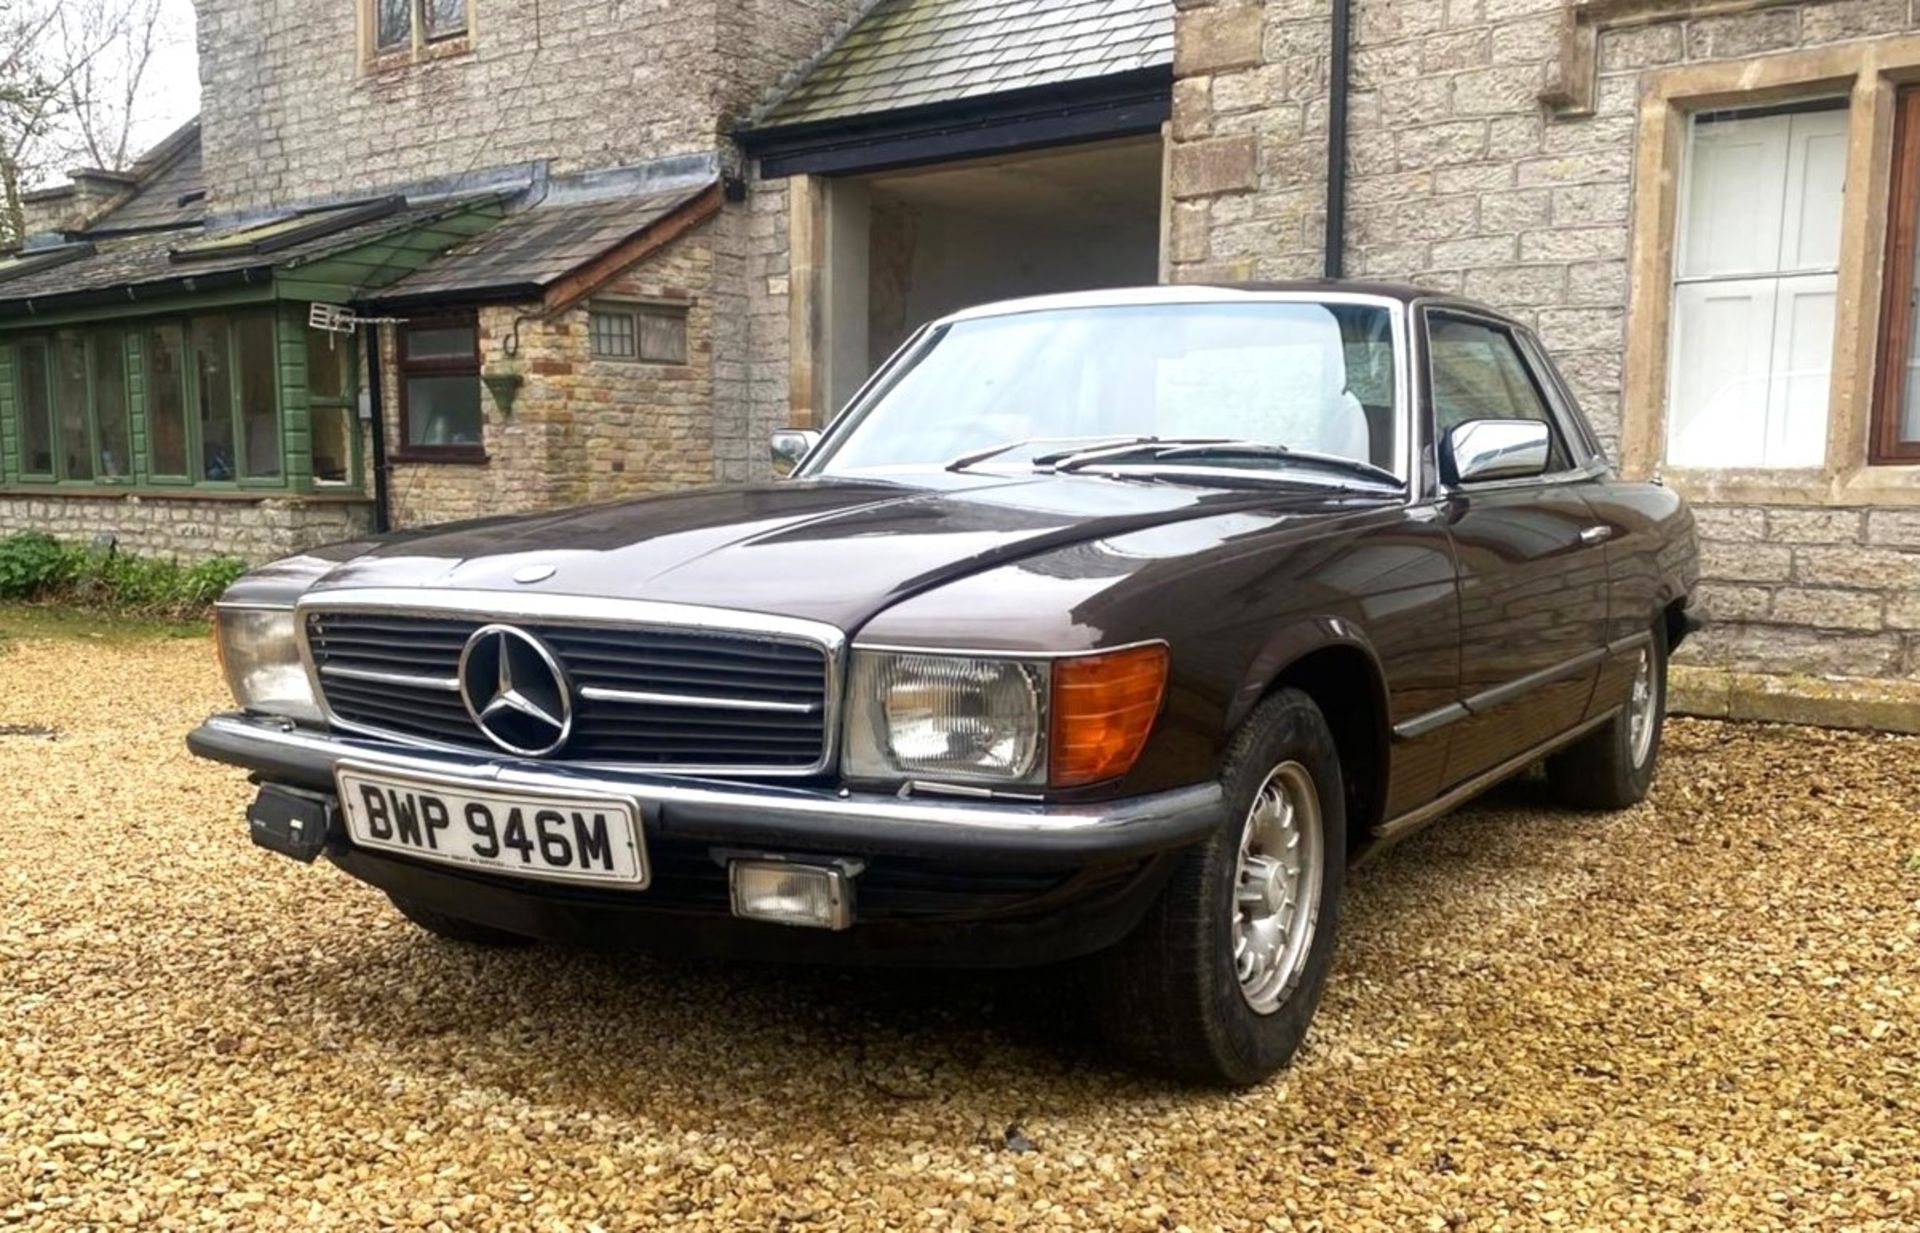 1980 MERCEDES-BENZ 380SLC Registration Number: BWP 946M Chassis Number: 107.025.22.000320 Recorded - Image 3 of 7